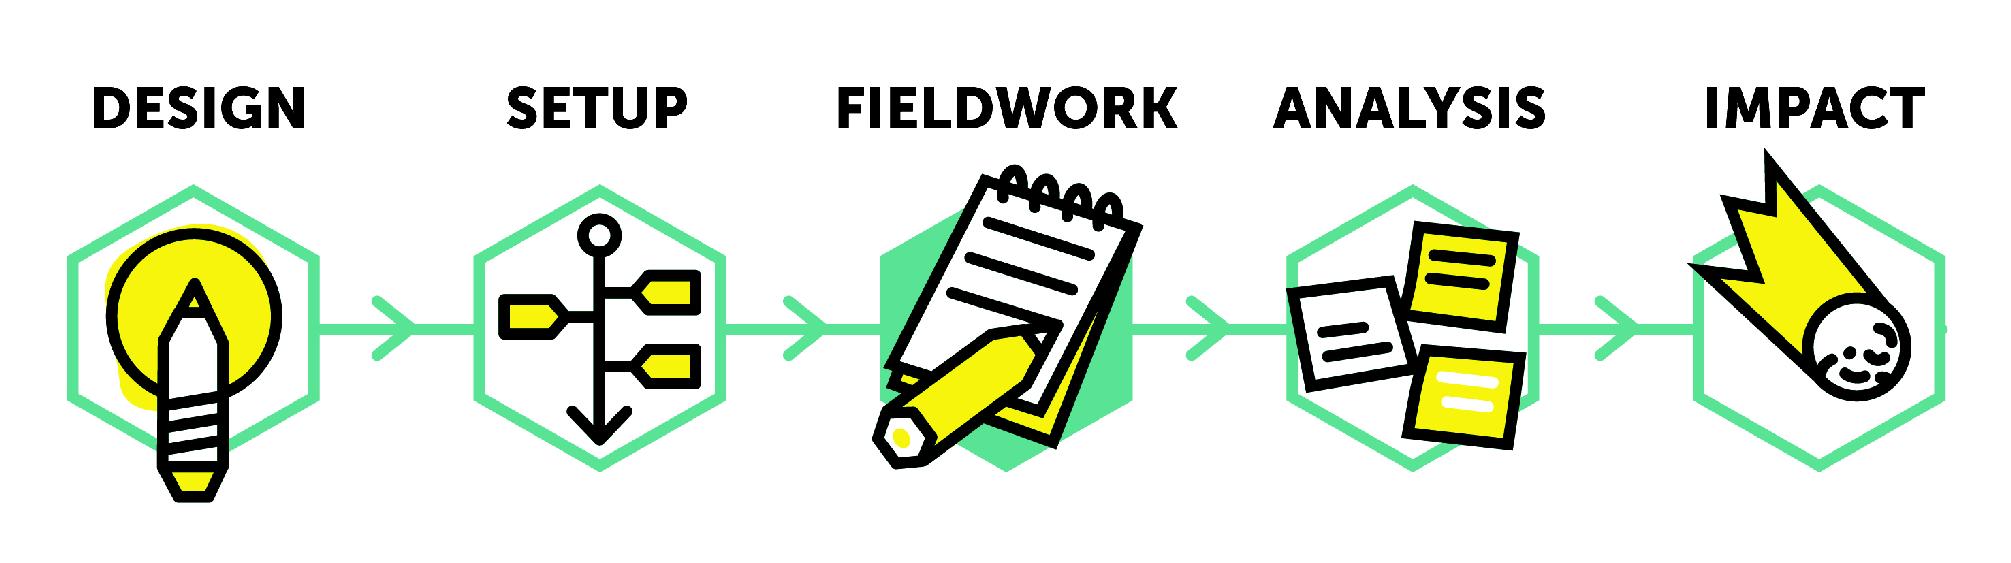 Research cycle: fieldwork